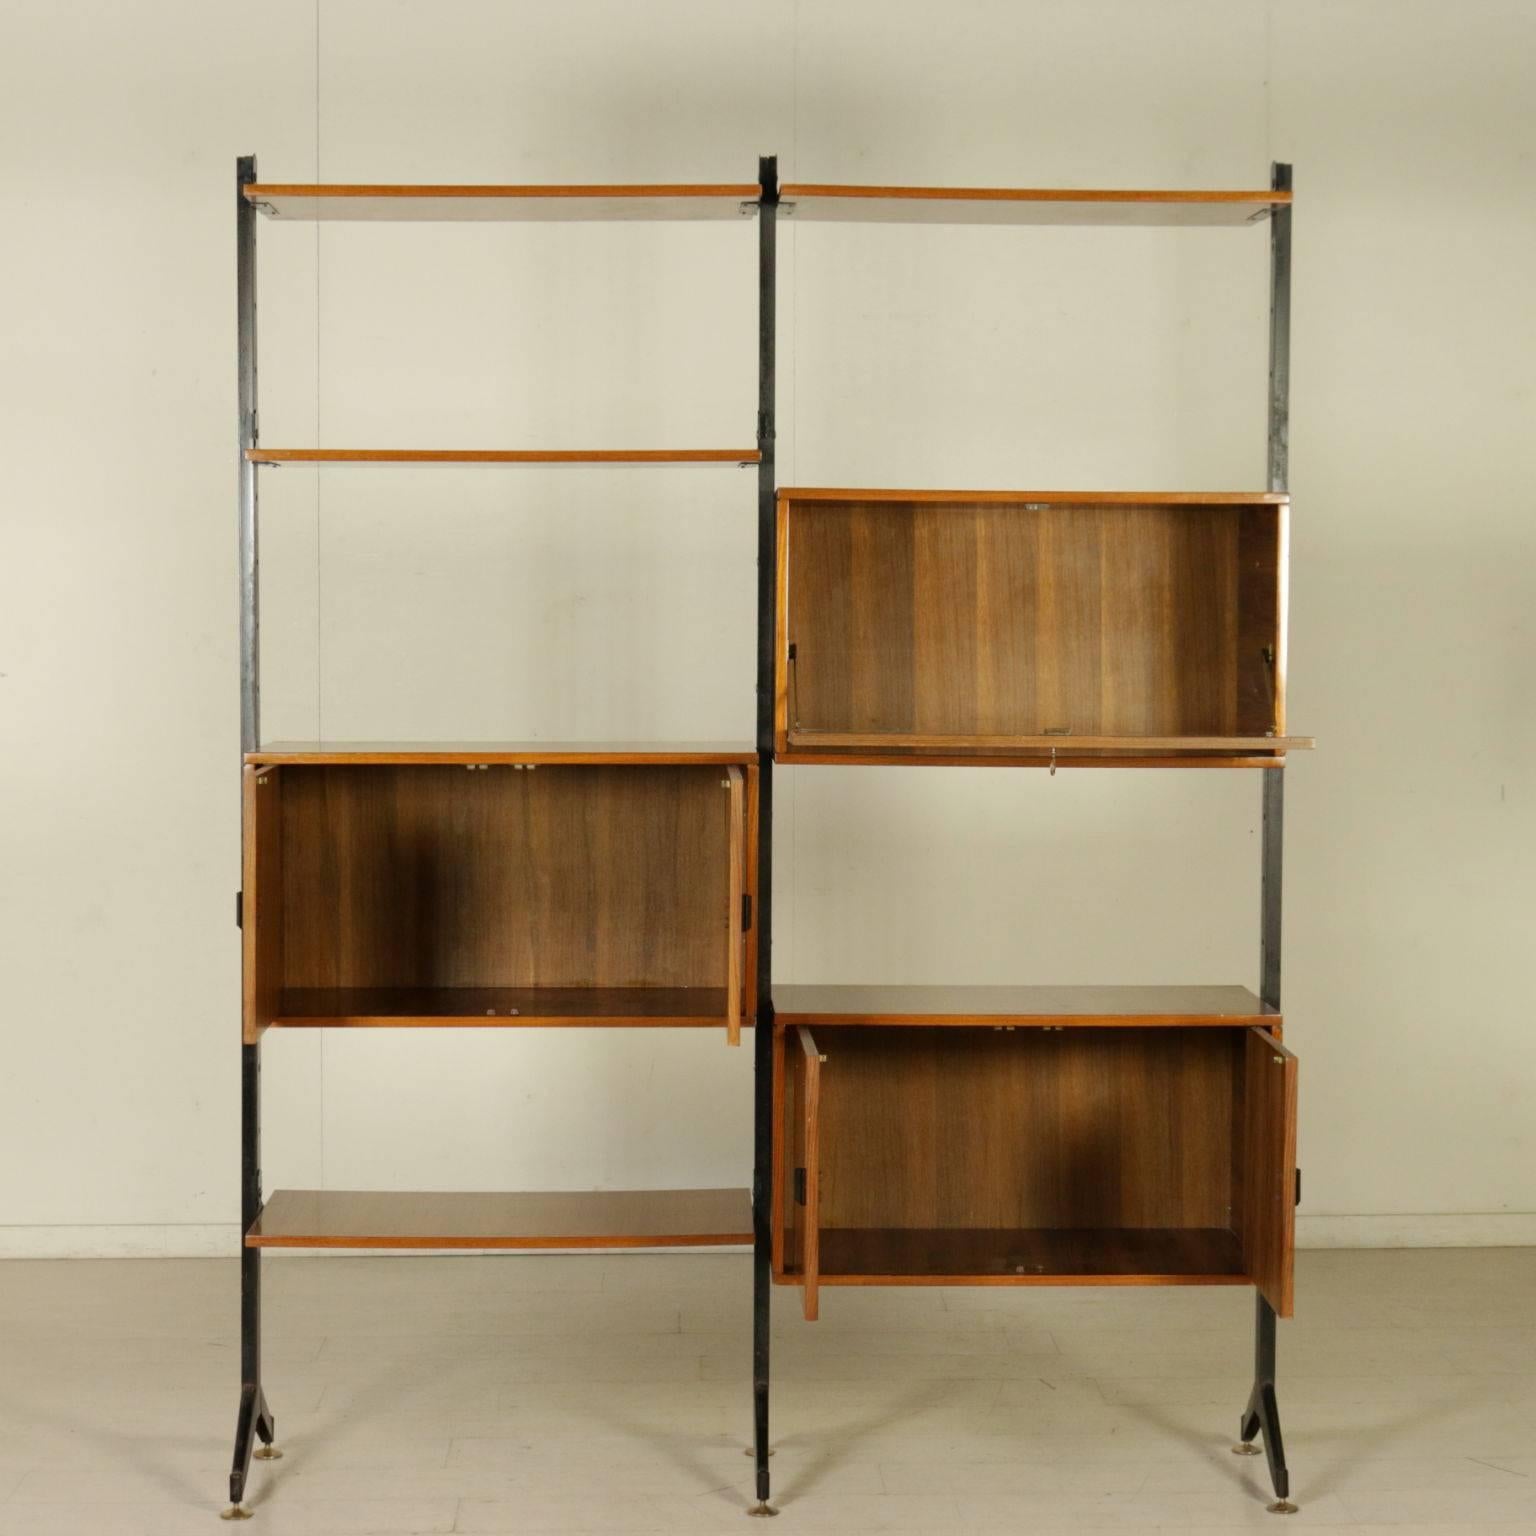 A bookcase with elements adjustable in height, metal uprights, brass, teak veneered wood. Manufactured in Italy, 1950s-1960s.